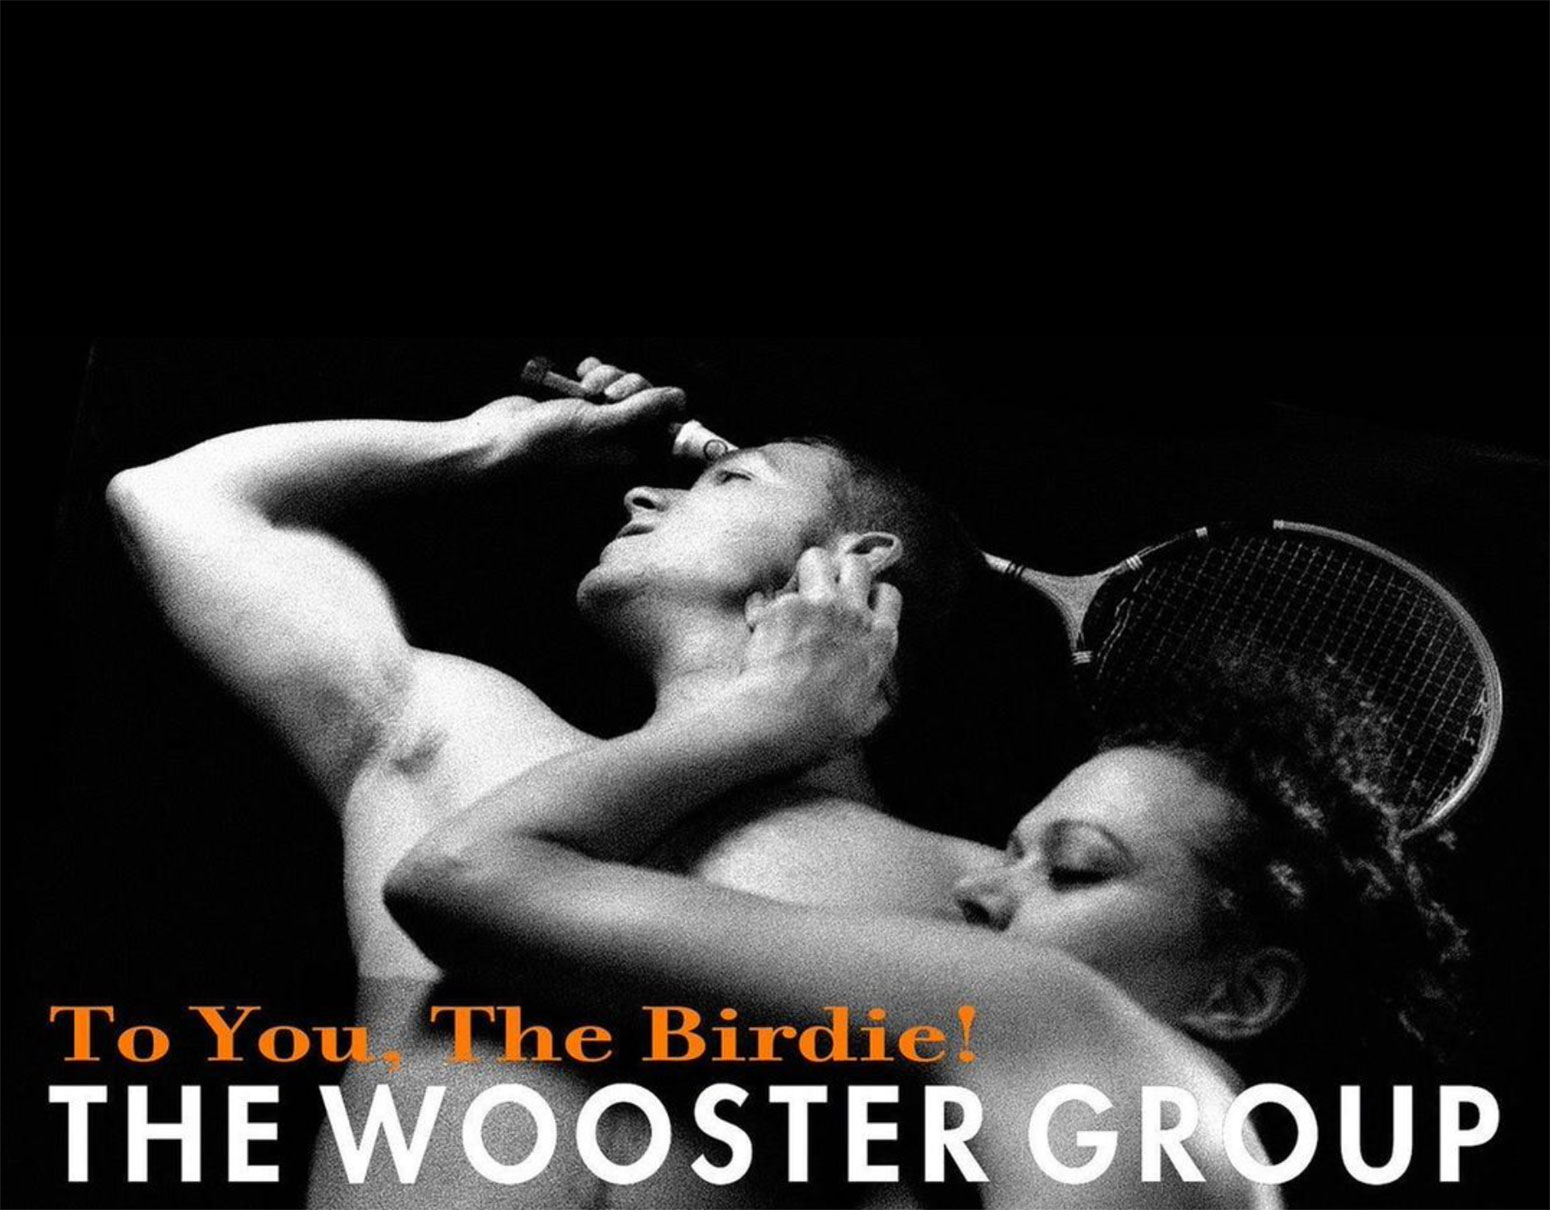 Mercer Hotel | The Wooster Group, time machine, to you the birdie